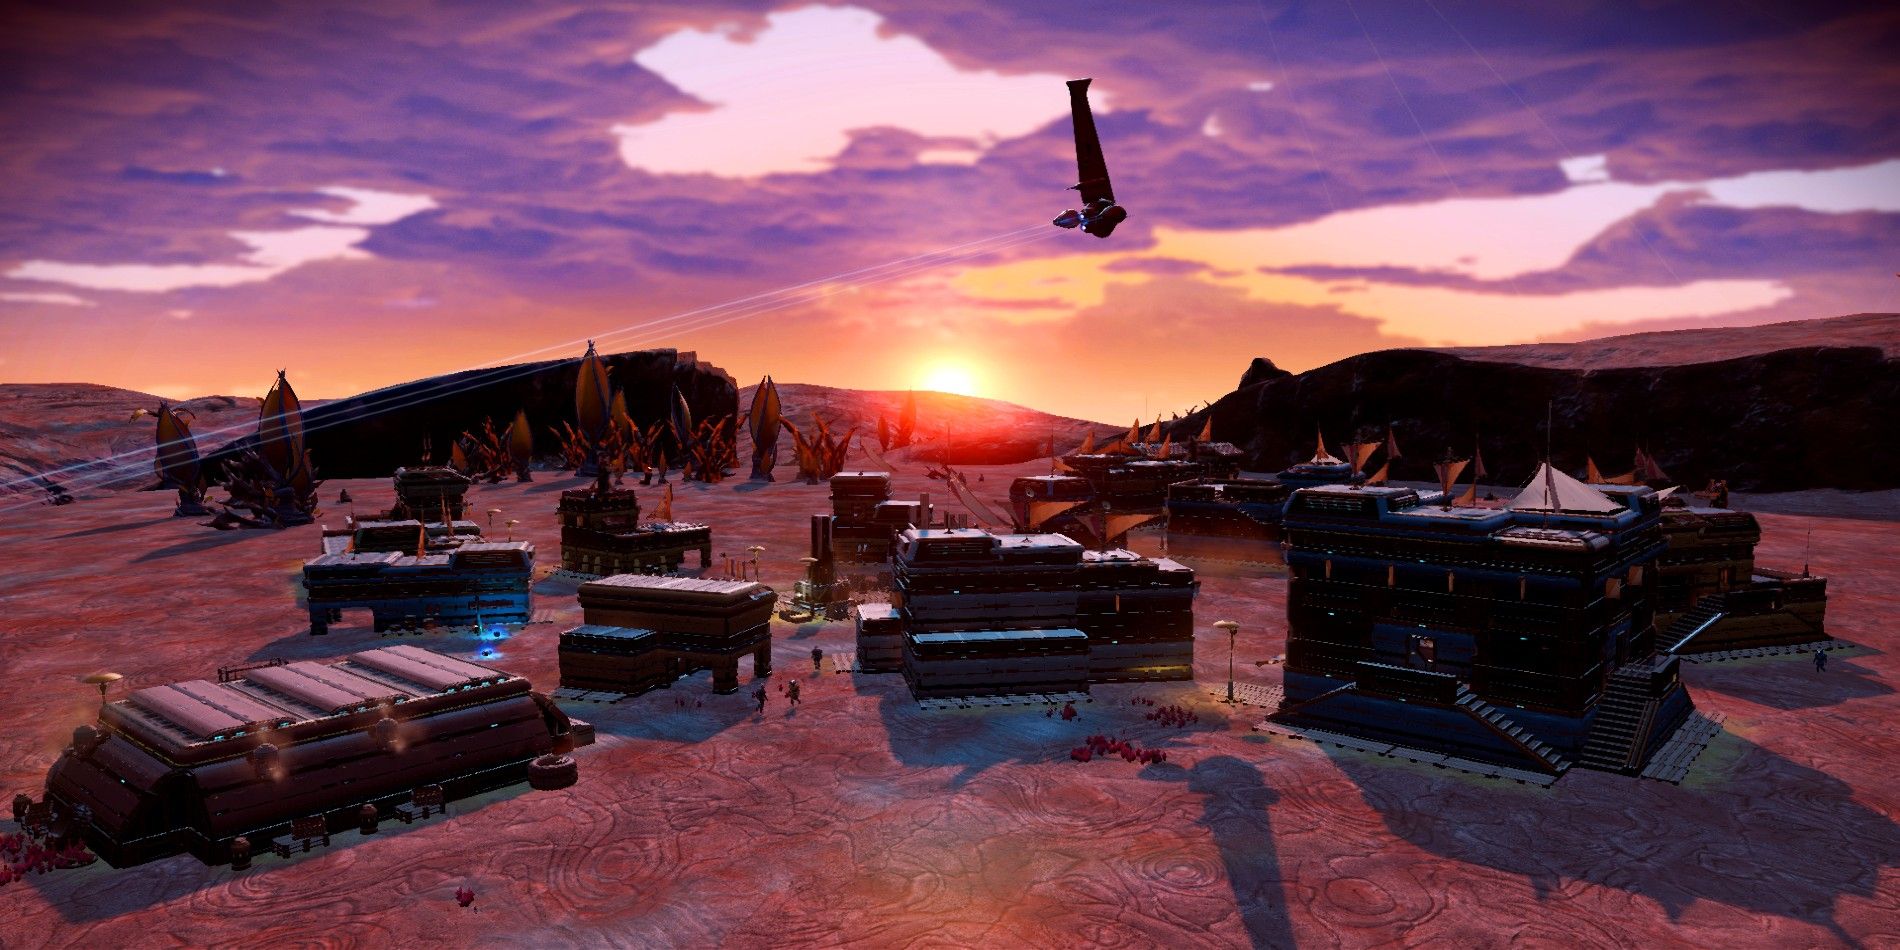 A settlement in No Man's Sky at sunset with a large ship hovering in the background